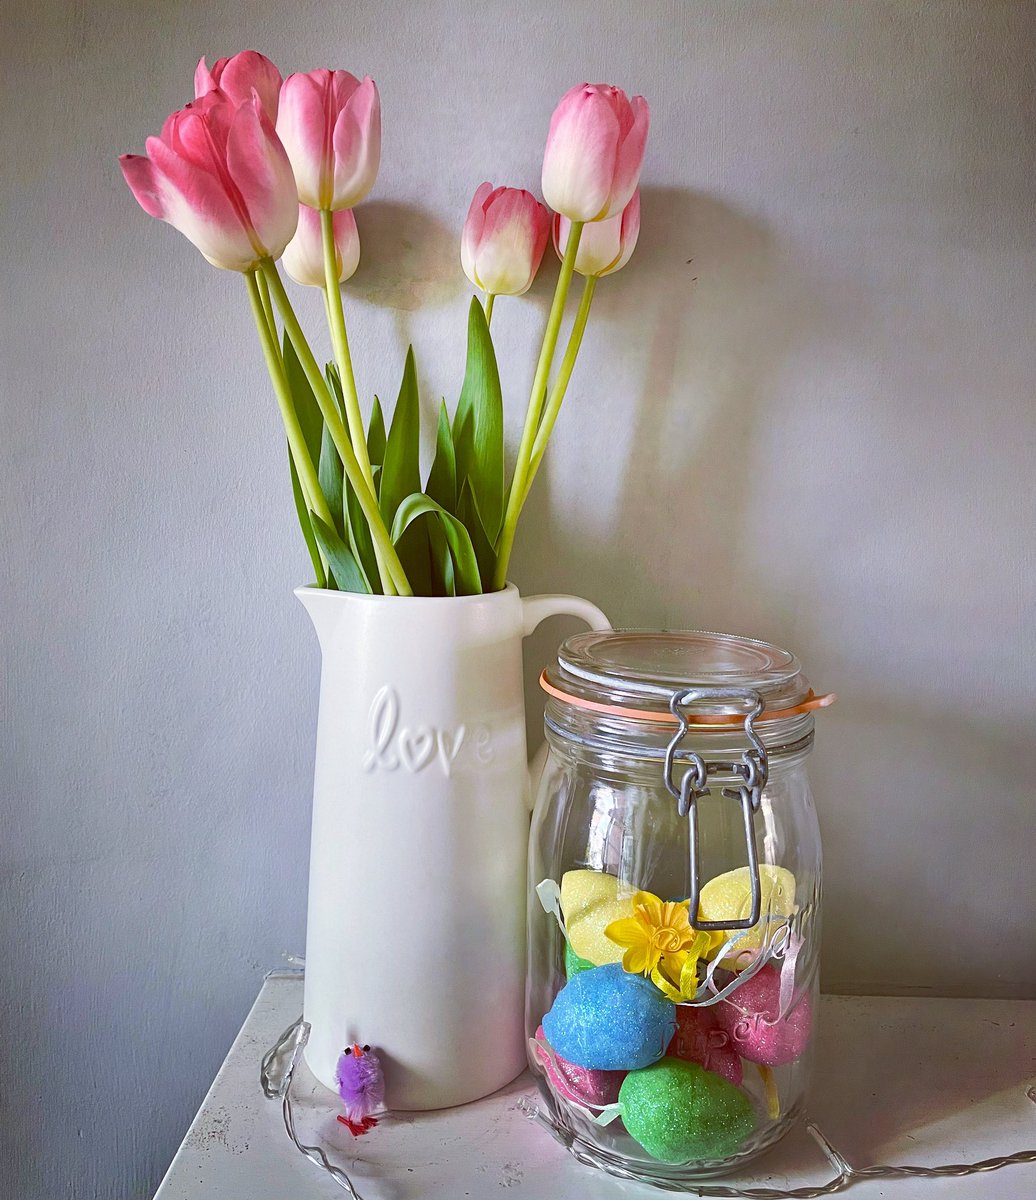 Happy Easter to family, friends, and anyone who needs to hear it x #easter #happyeaster #eastersunday #tulips #spring #springflowers #spring #easterdecor #masonjar #eggs #chick